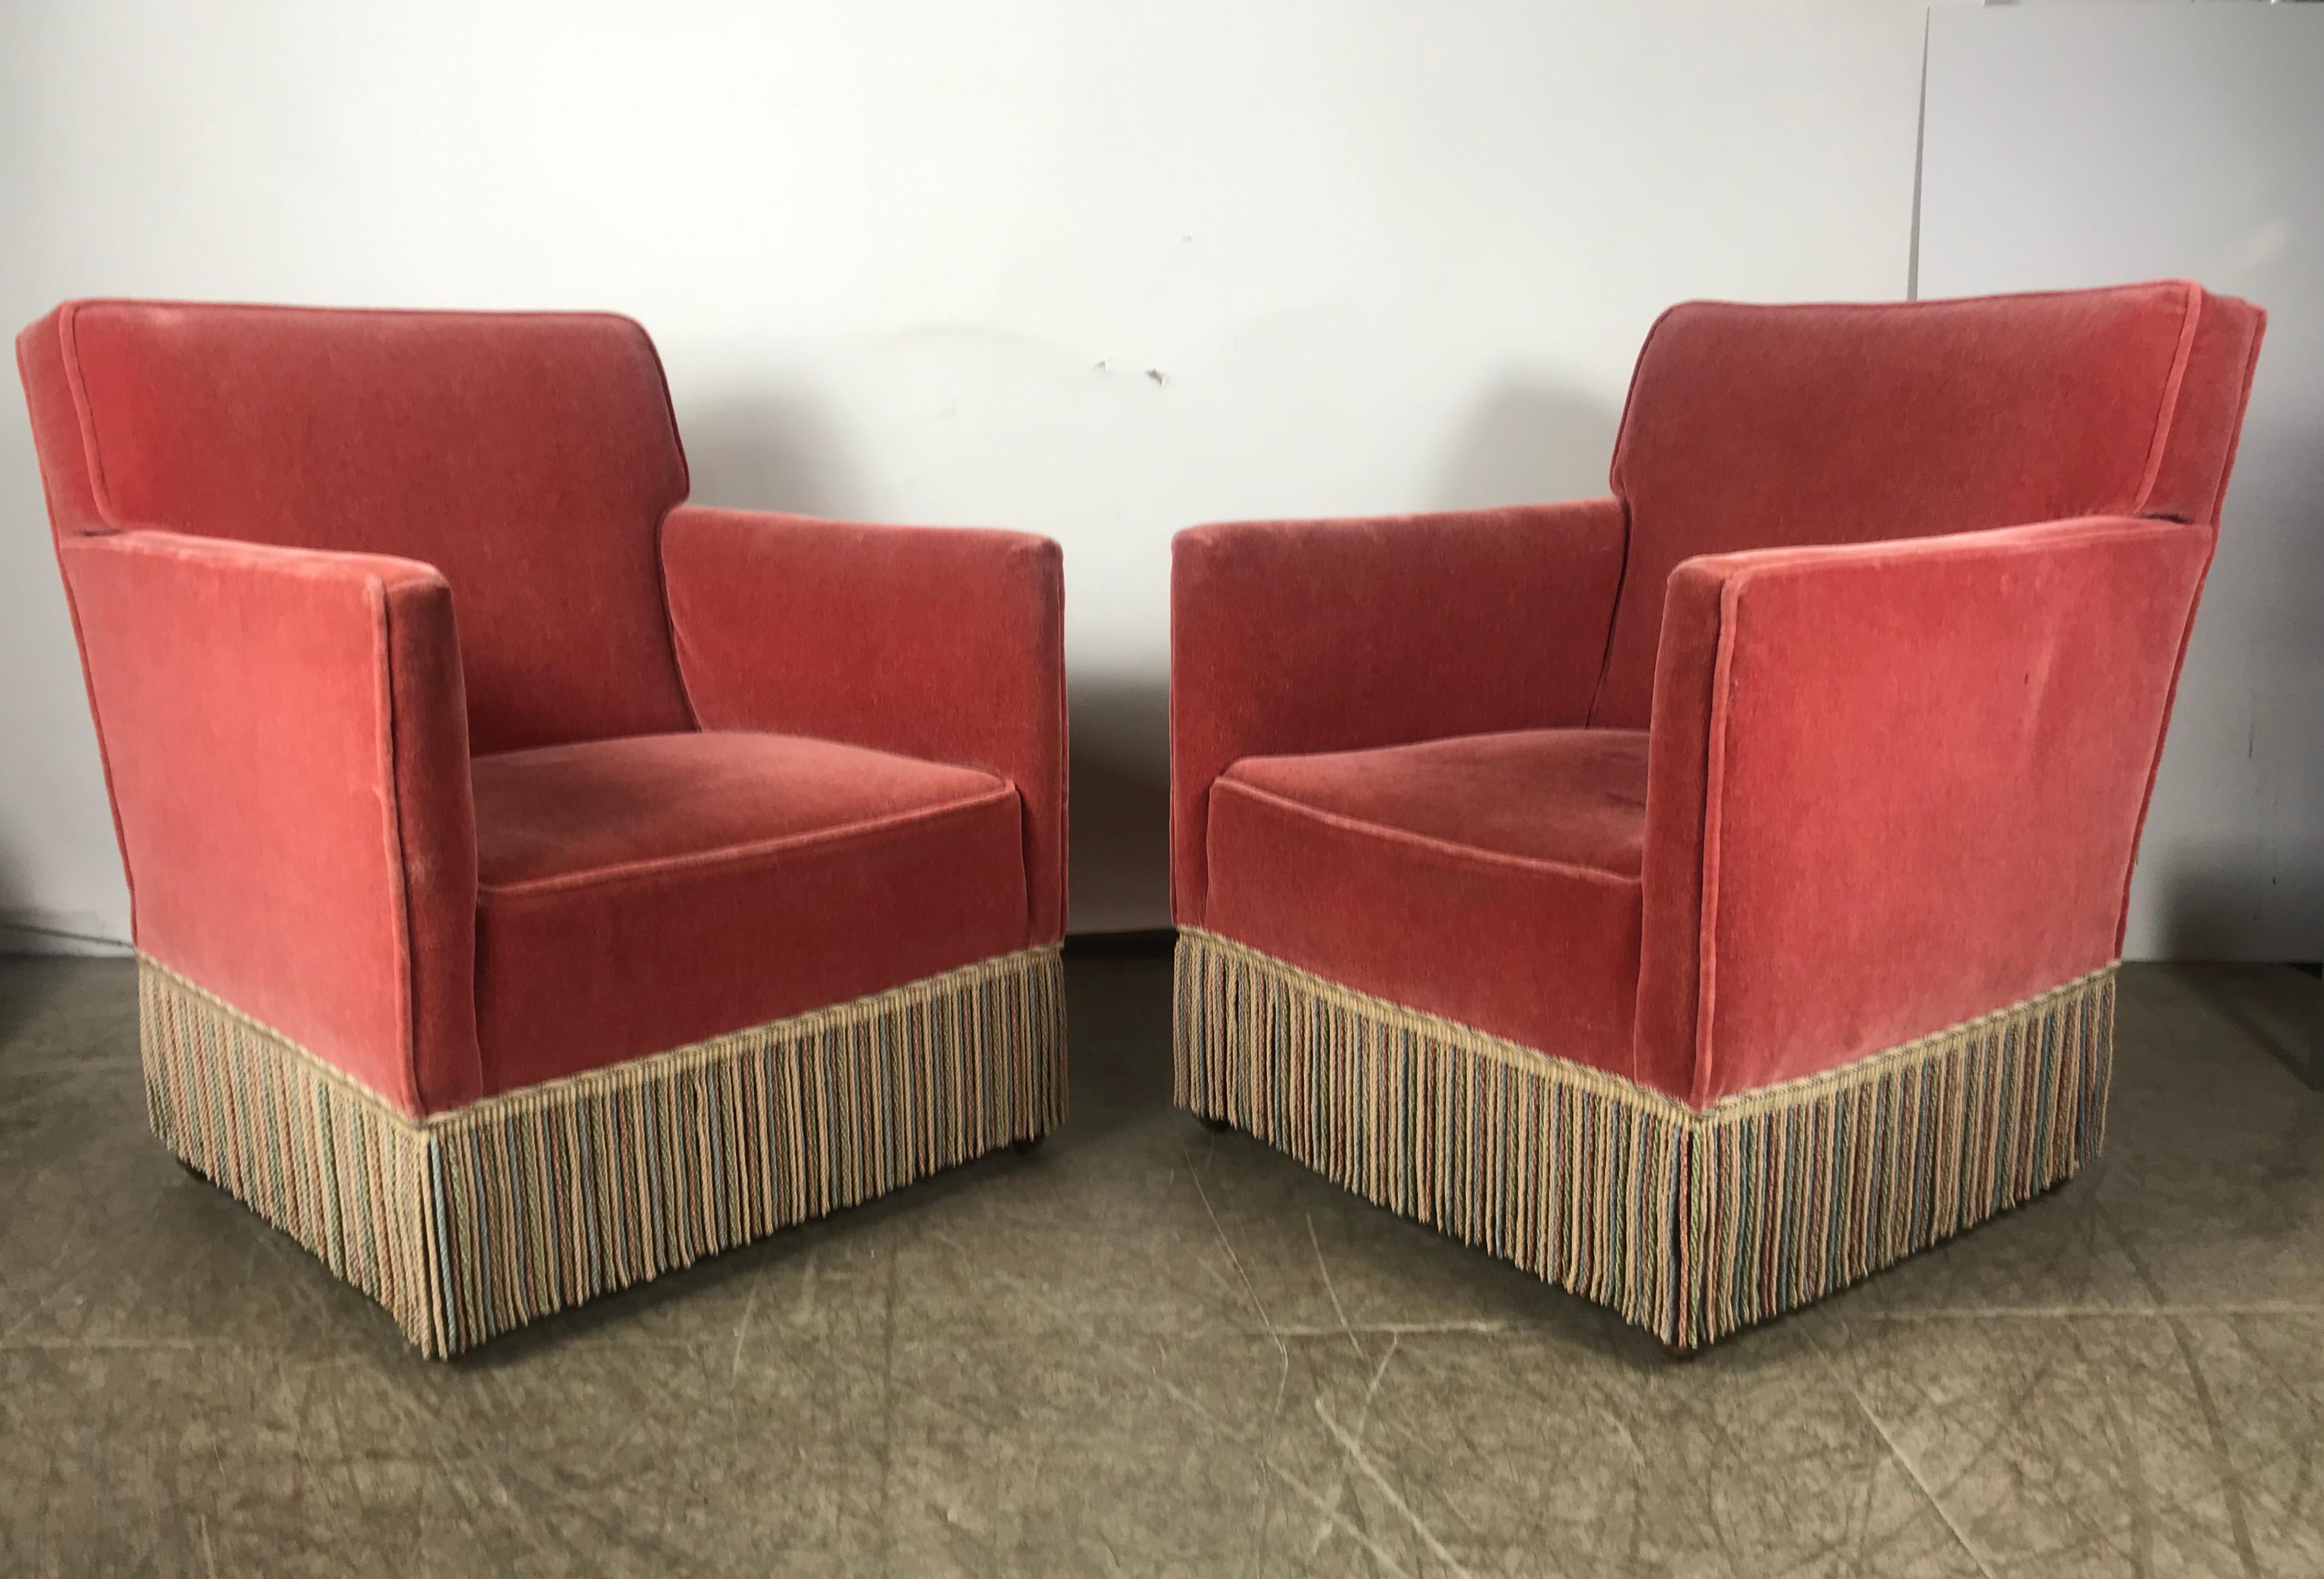 Stunning Pair of Art Deco Salmon Color Mohair Club Chairs, Modernist Design 2